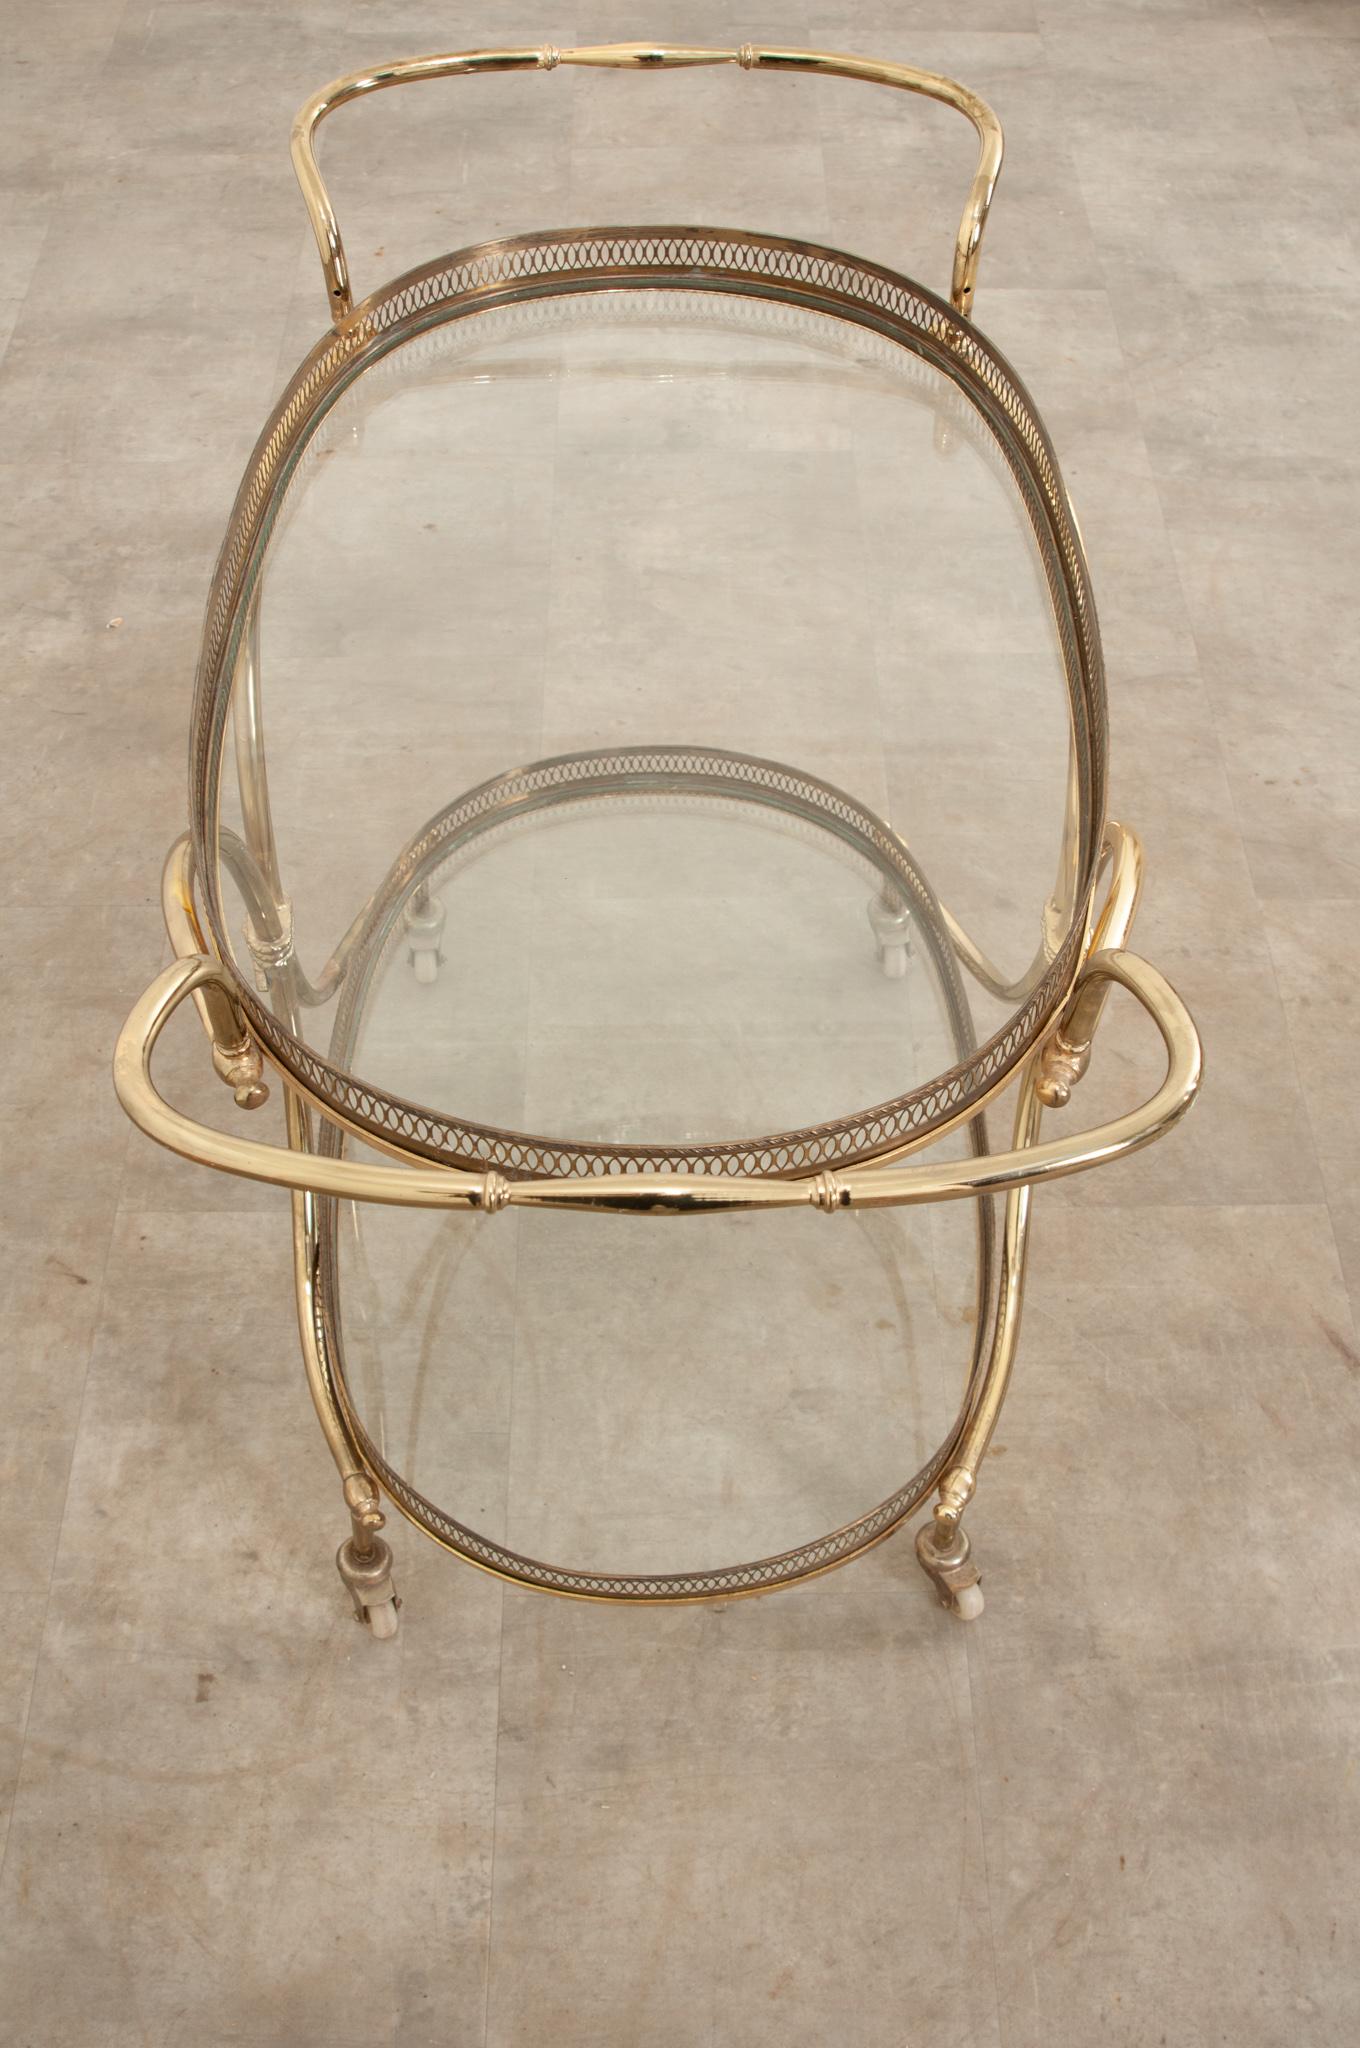 An elegant brass bar cart or trolley is the perfect occasional table for your interior. This curvy tiered bar cart features two oval glass surfaces surrounded with pierced galleries, both are removable. The handles are accessorized with a knotted